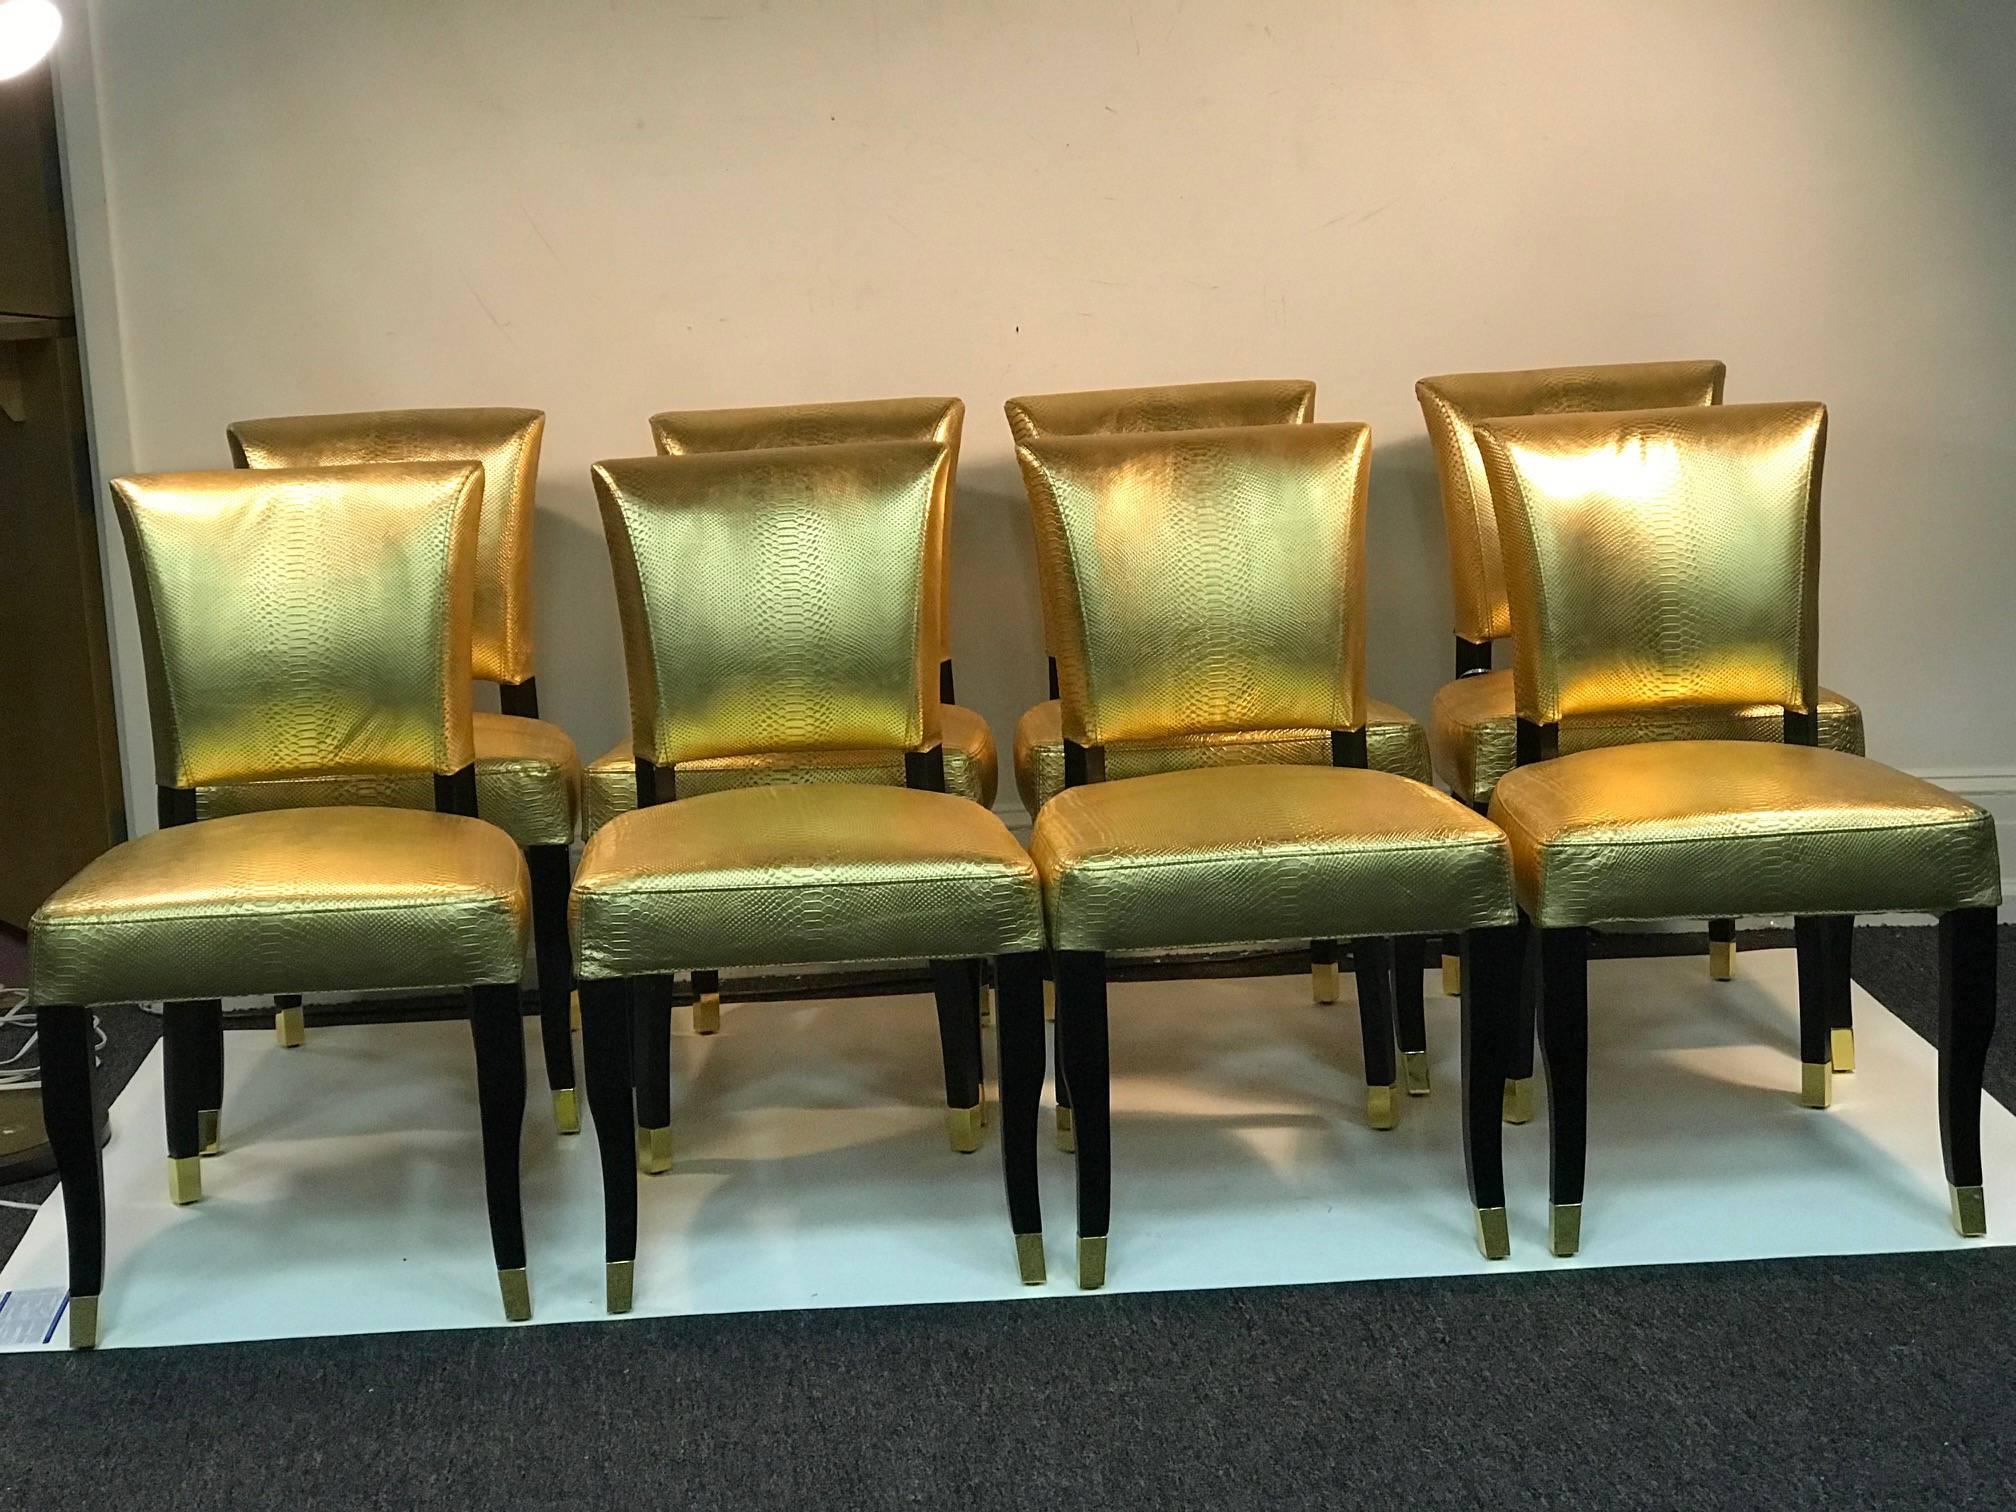 Suite of eight faux gold snakeskin dining chairs with ebonized legs and polished gold toned brass sabot legs and gold tone brass decorative buckle on their backs.